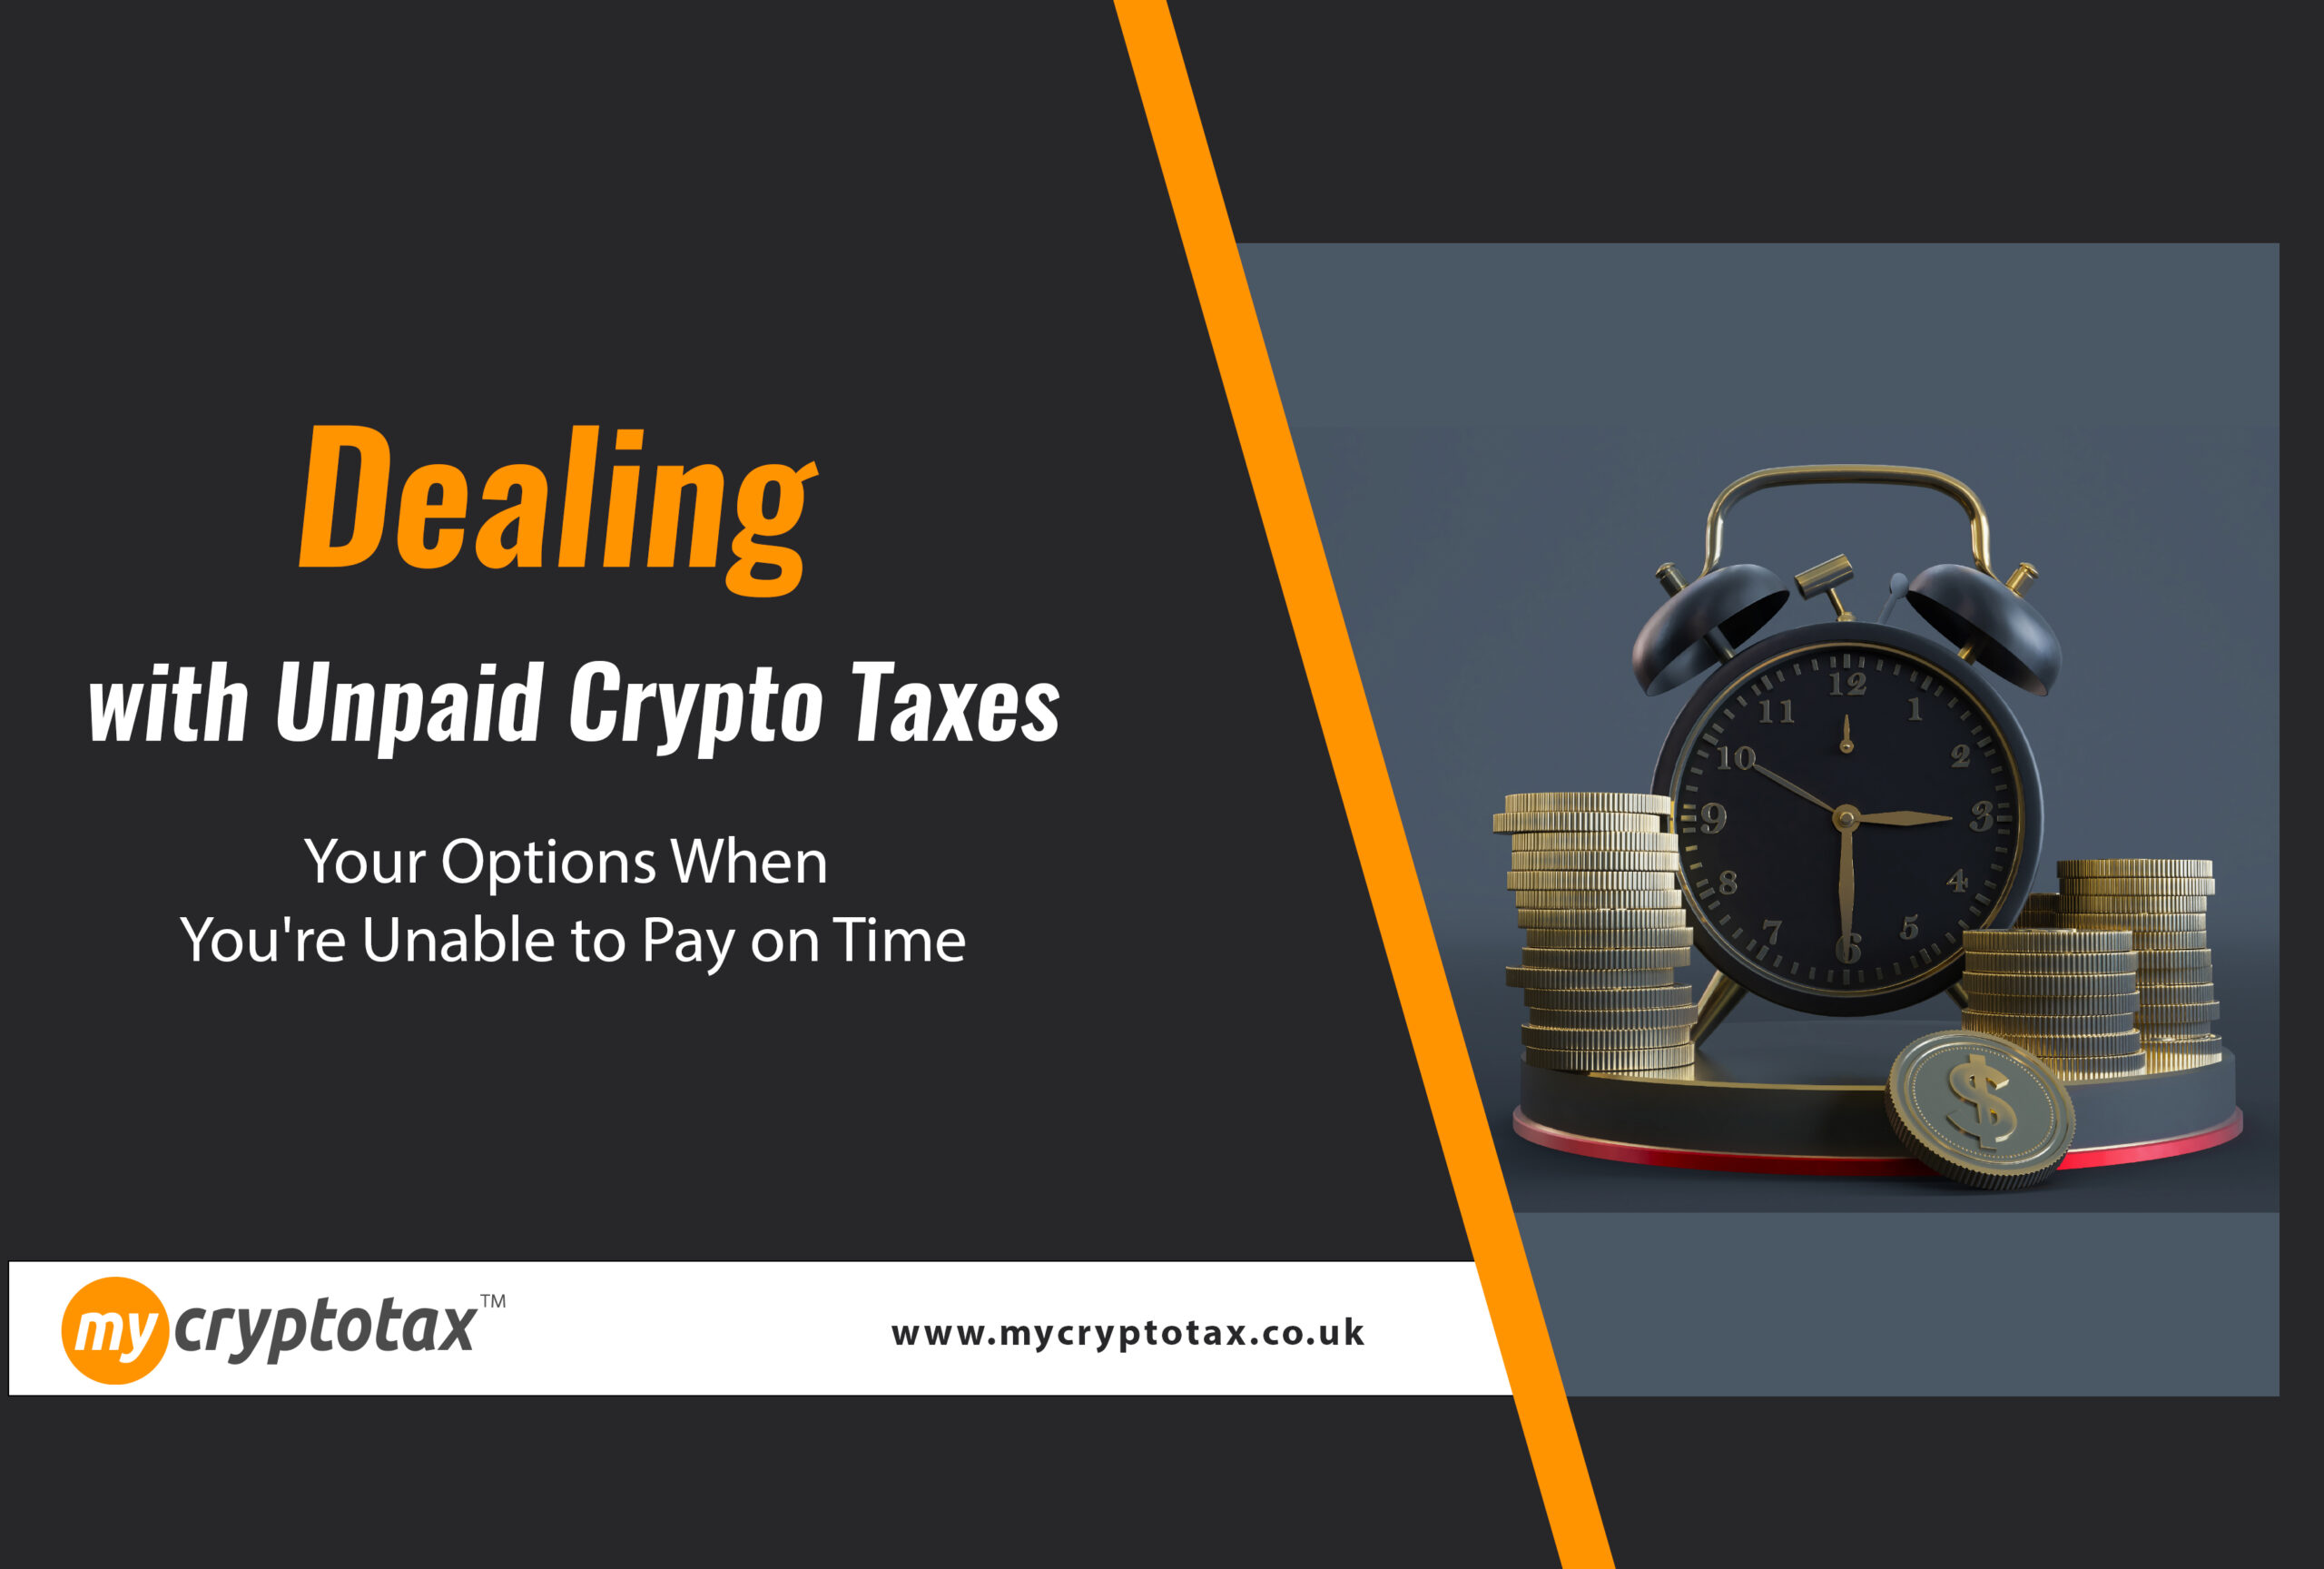 Crypto tax compliance, Cryptocurrency tax services, Bitcoin tax specialists, Ethereum tax advisors, Crypto tax consultants, Tax implications of Cryptocurrency, Crypto accounting experts, Cryptocurrency tax reporting, Cryptocurrency tax optimization, Crypto tax advice London, Cryptocurrency tax experts in the UK, Crypto tax return assistance, Cryptocurrency capital gains tax, Cryptocurrency accountants, Cryptocurrency accountants near me, Cryptocurrency tax advisor uk, Cryptocurrency tax investigation, Cryptocurrency tax planning, Crypto tax planning and optimization, Crypto tax return preparation, Crypto accounting for businesses, Crypto tax reporting requirements, Crypto tax relief in the UK, Cryptocurrency tax implications for traders, Crypto tax services for investors, Crypto tax consultancy London, Cryptocurrency accounting and bookkeeping, Crypto tax experts for startups, Cryptocurrency tax FAQ, UK crypto tax advisory firm, Crypto tax advisory services